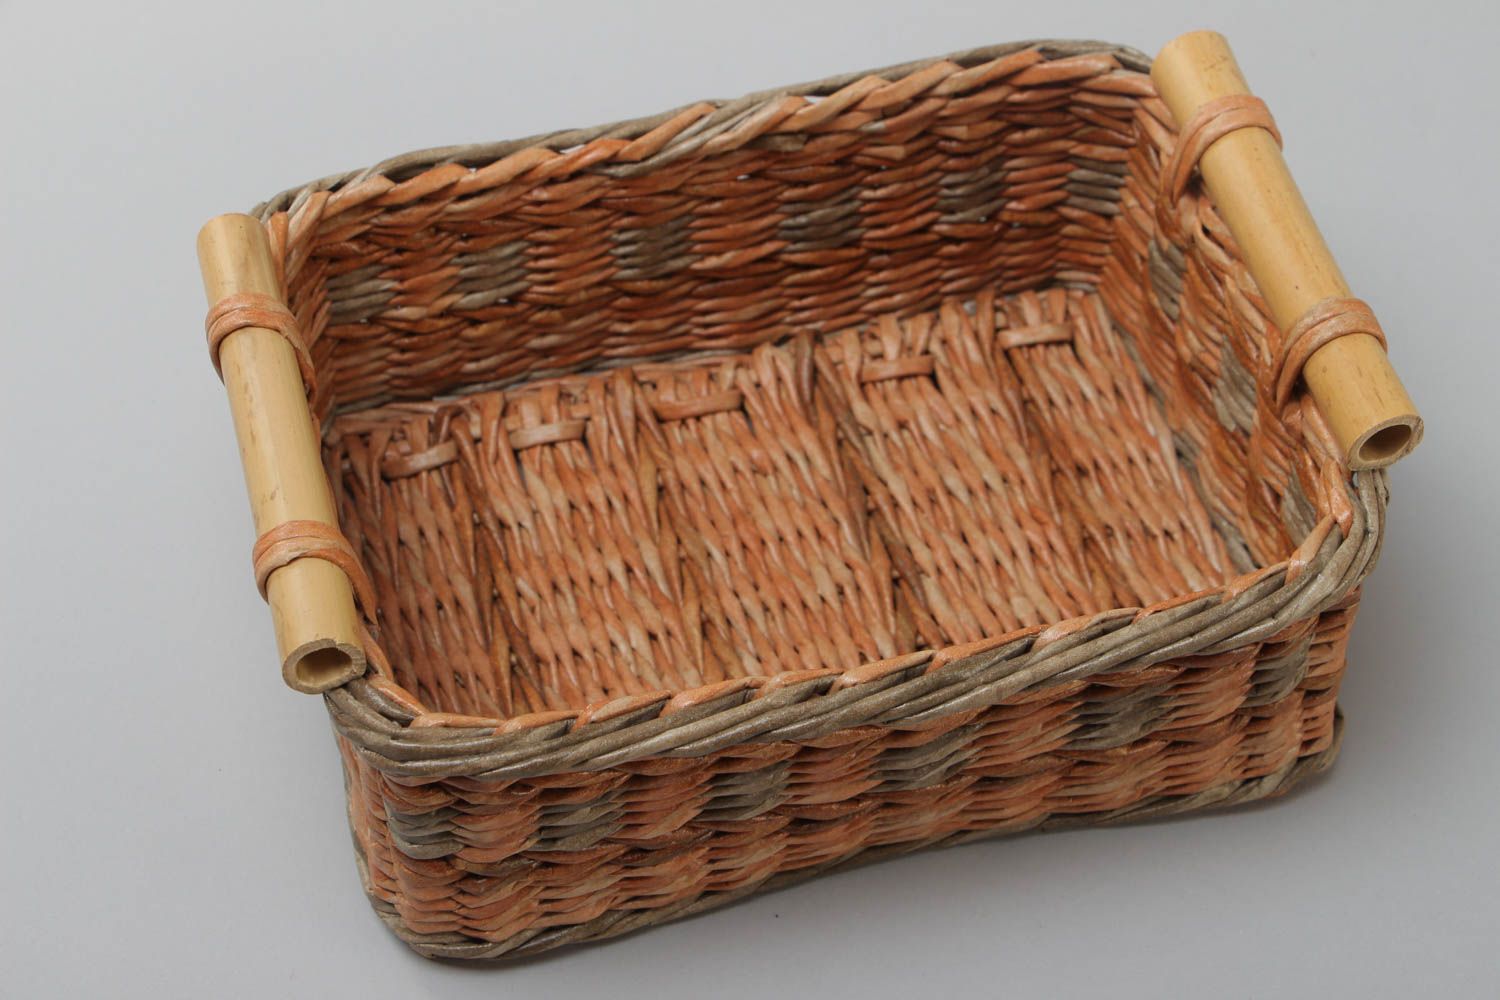 Handmade twist woven tray with two handles in the shape of basket photo 2